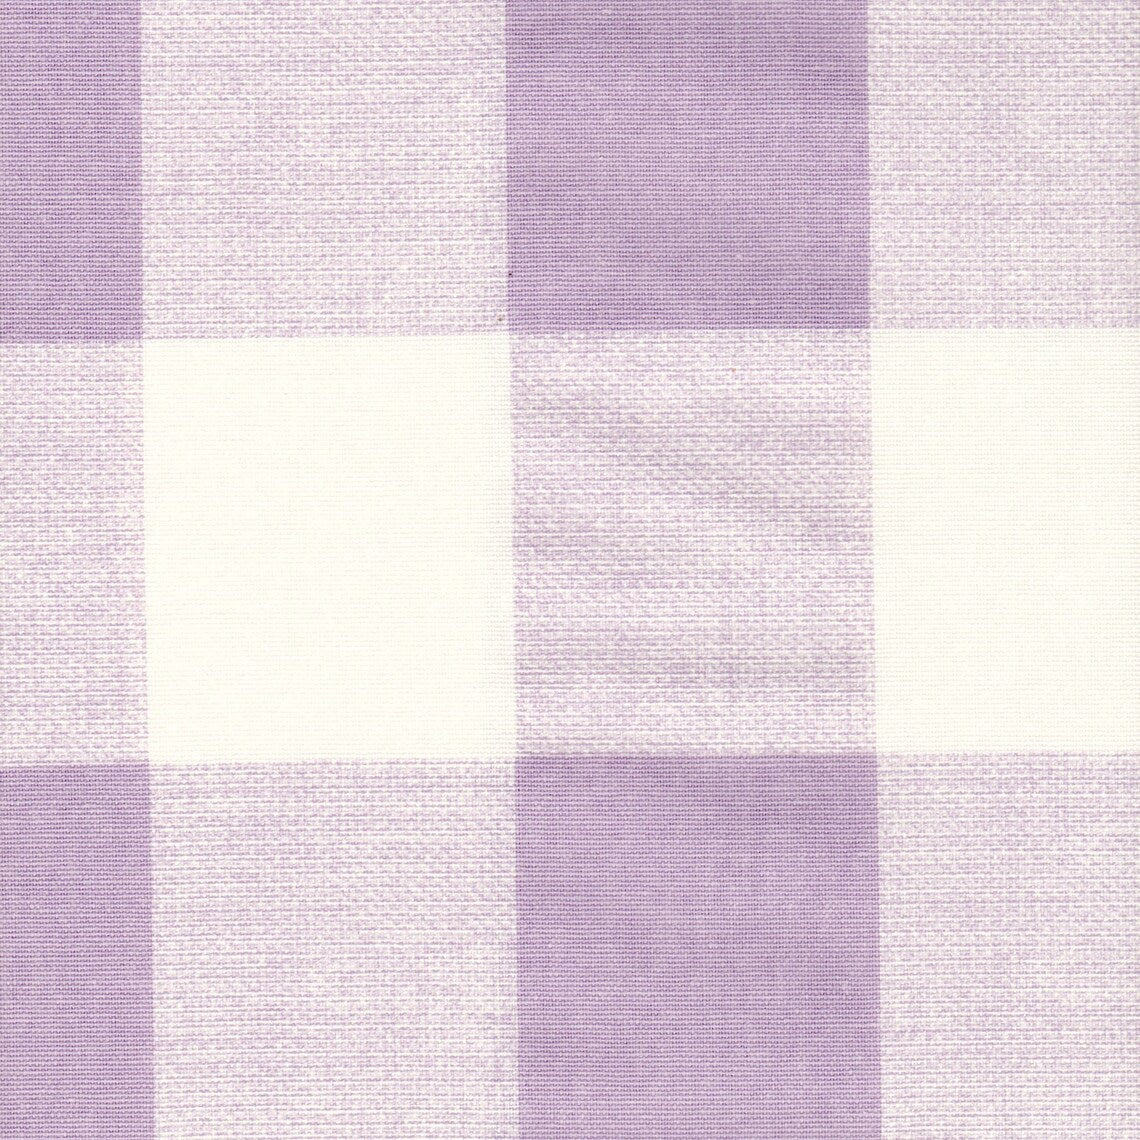 Tailored Valance in Anderson Orchid Lavender Buffalo Check Plaid